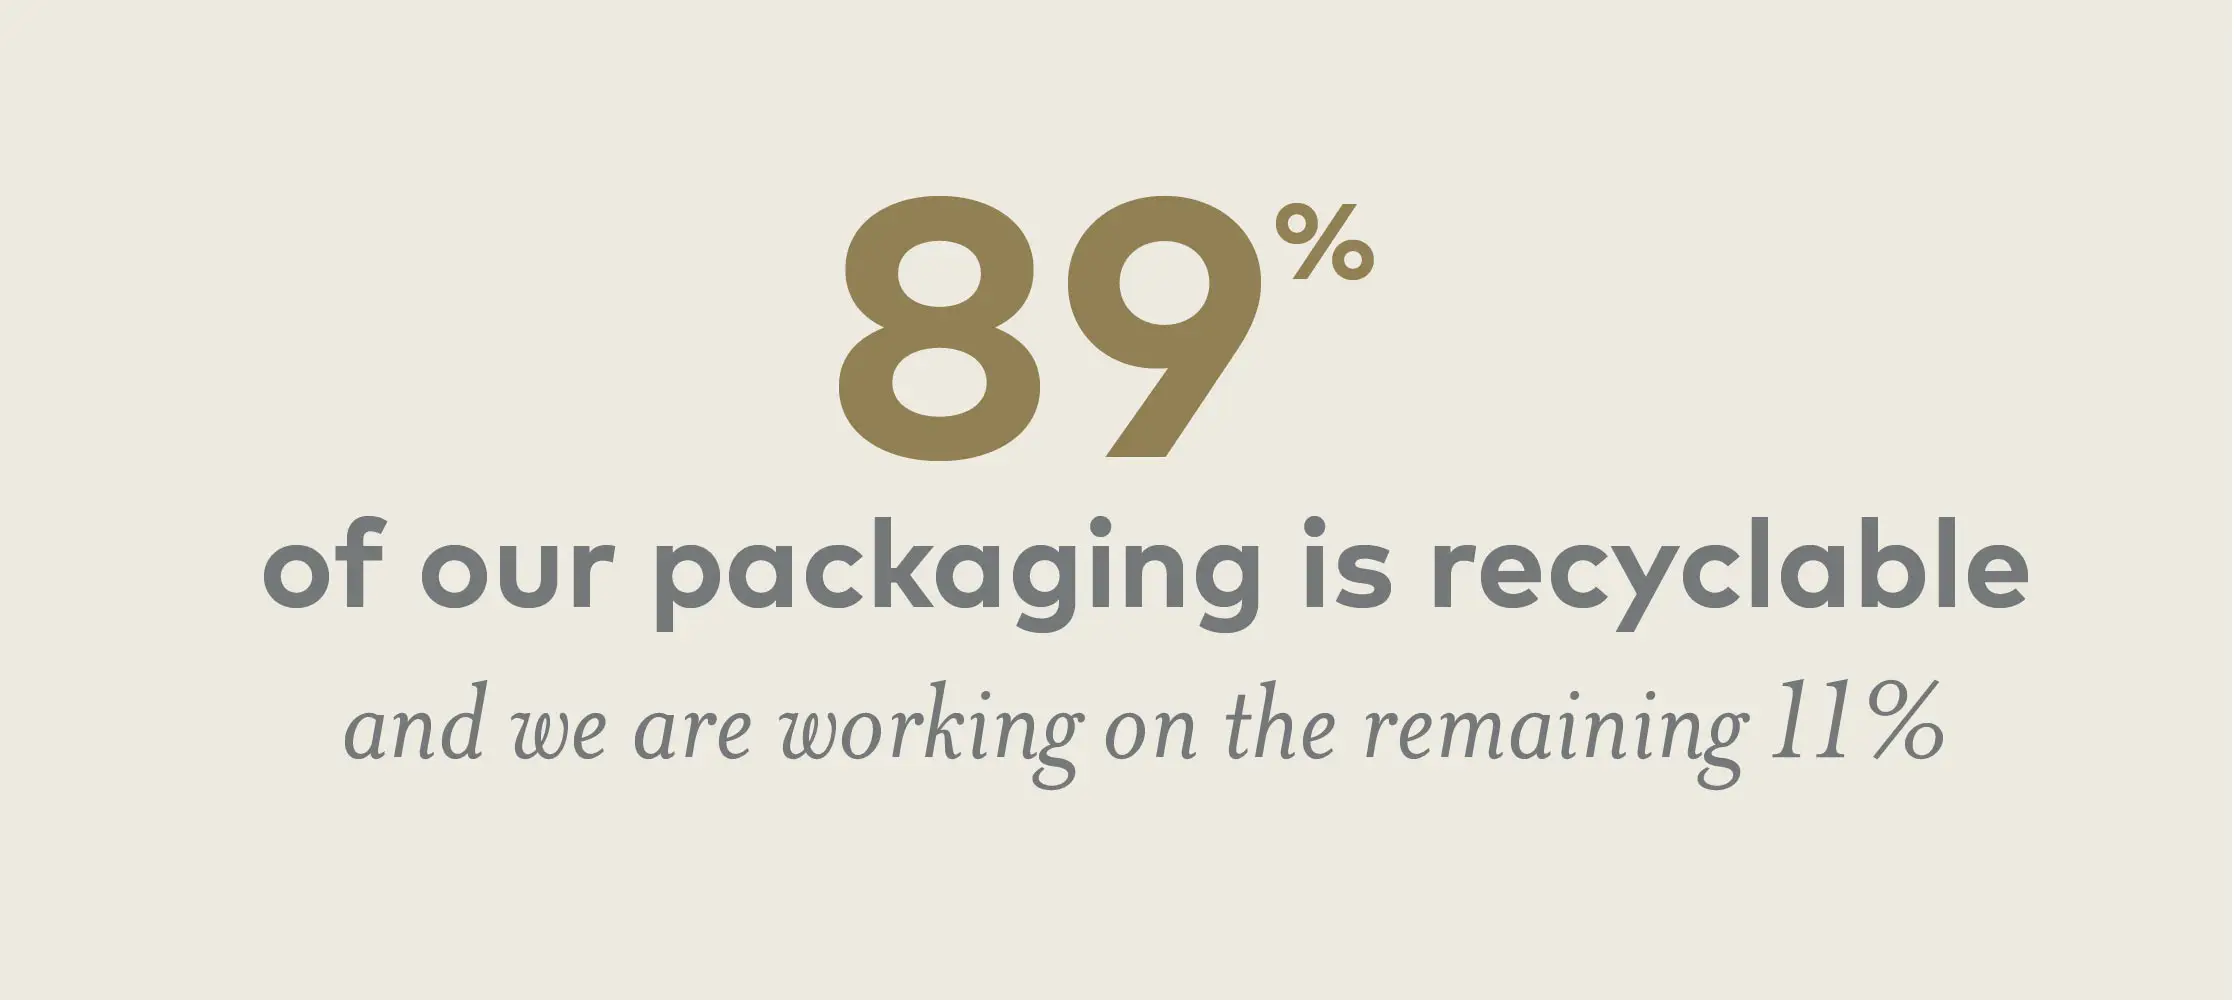 89% of our packaging is recyclable